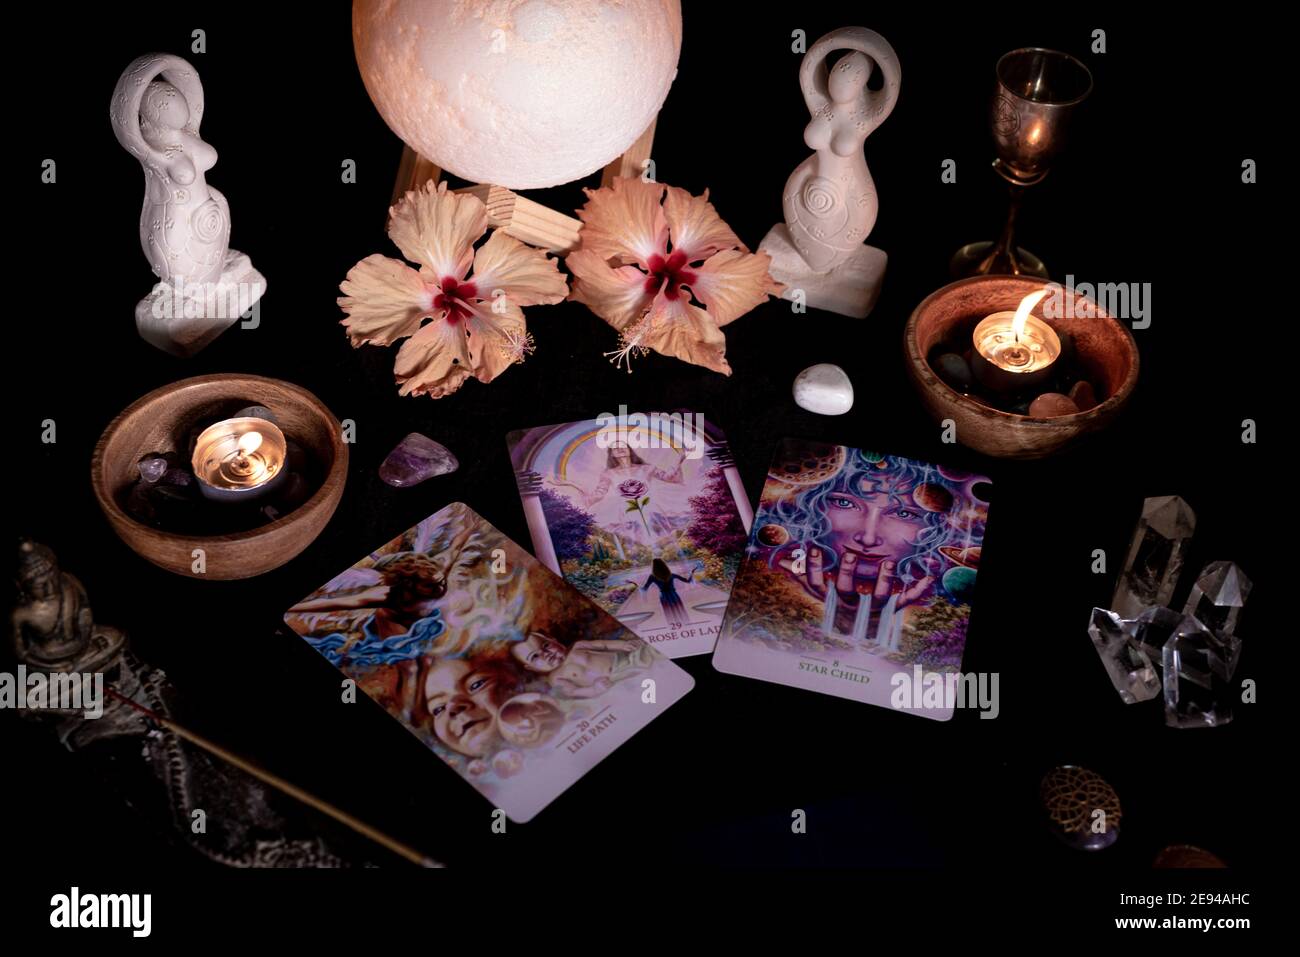 Tarot cards session 2, spreads, candles, crystals, minerals, statuettes and flowers Stock Photo